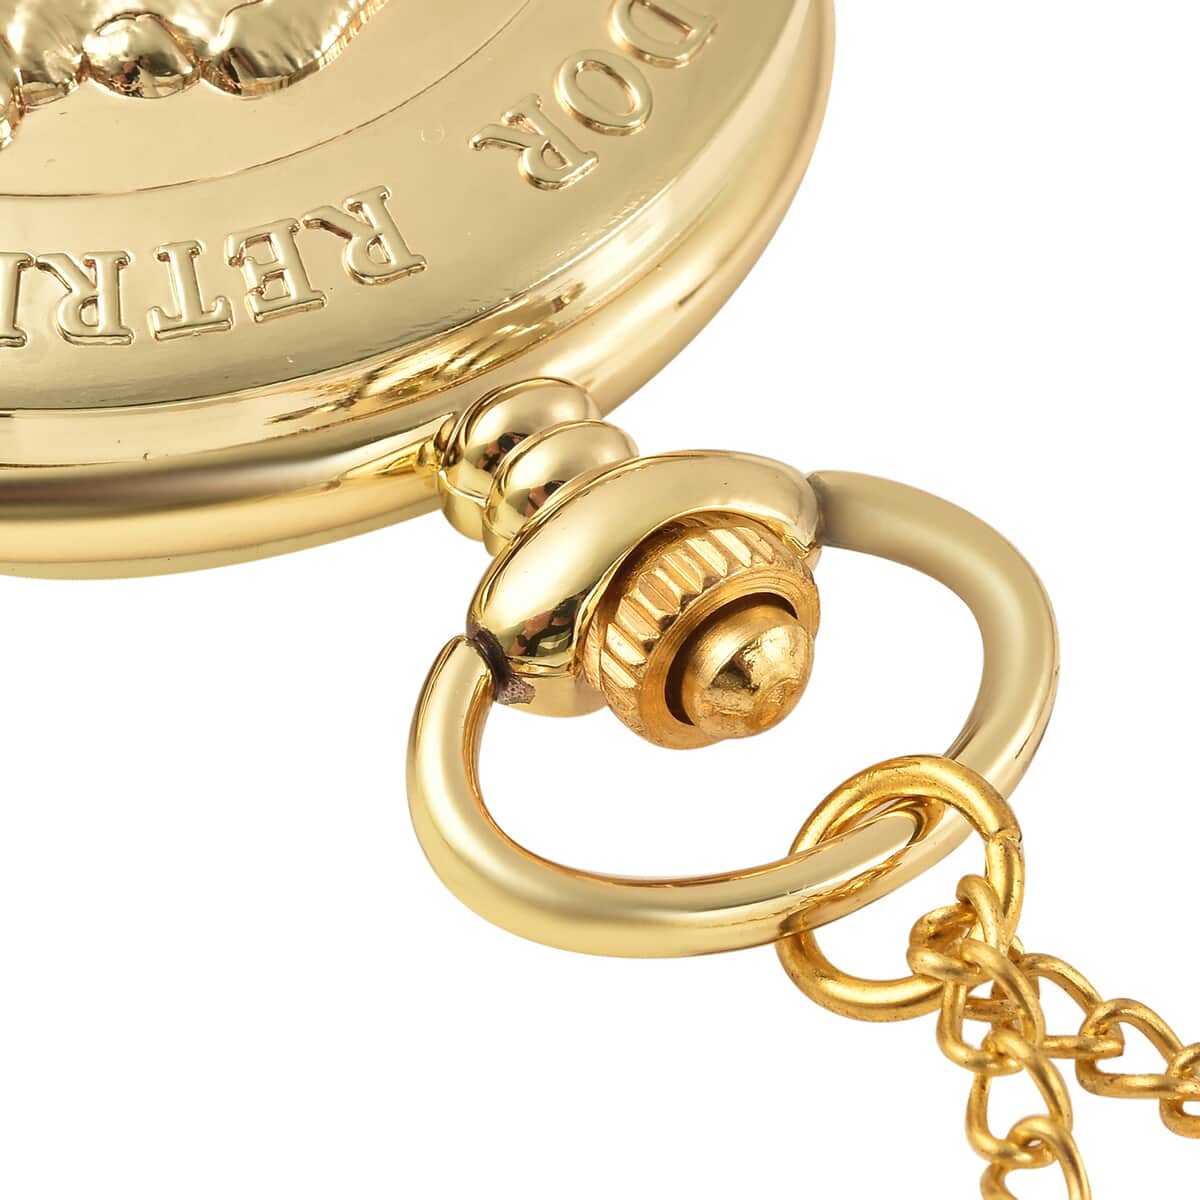 Strada Japanese Movement Labrador Pocket Watch in Goldtone with Chain (31 Inches) image number 5